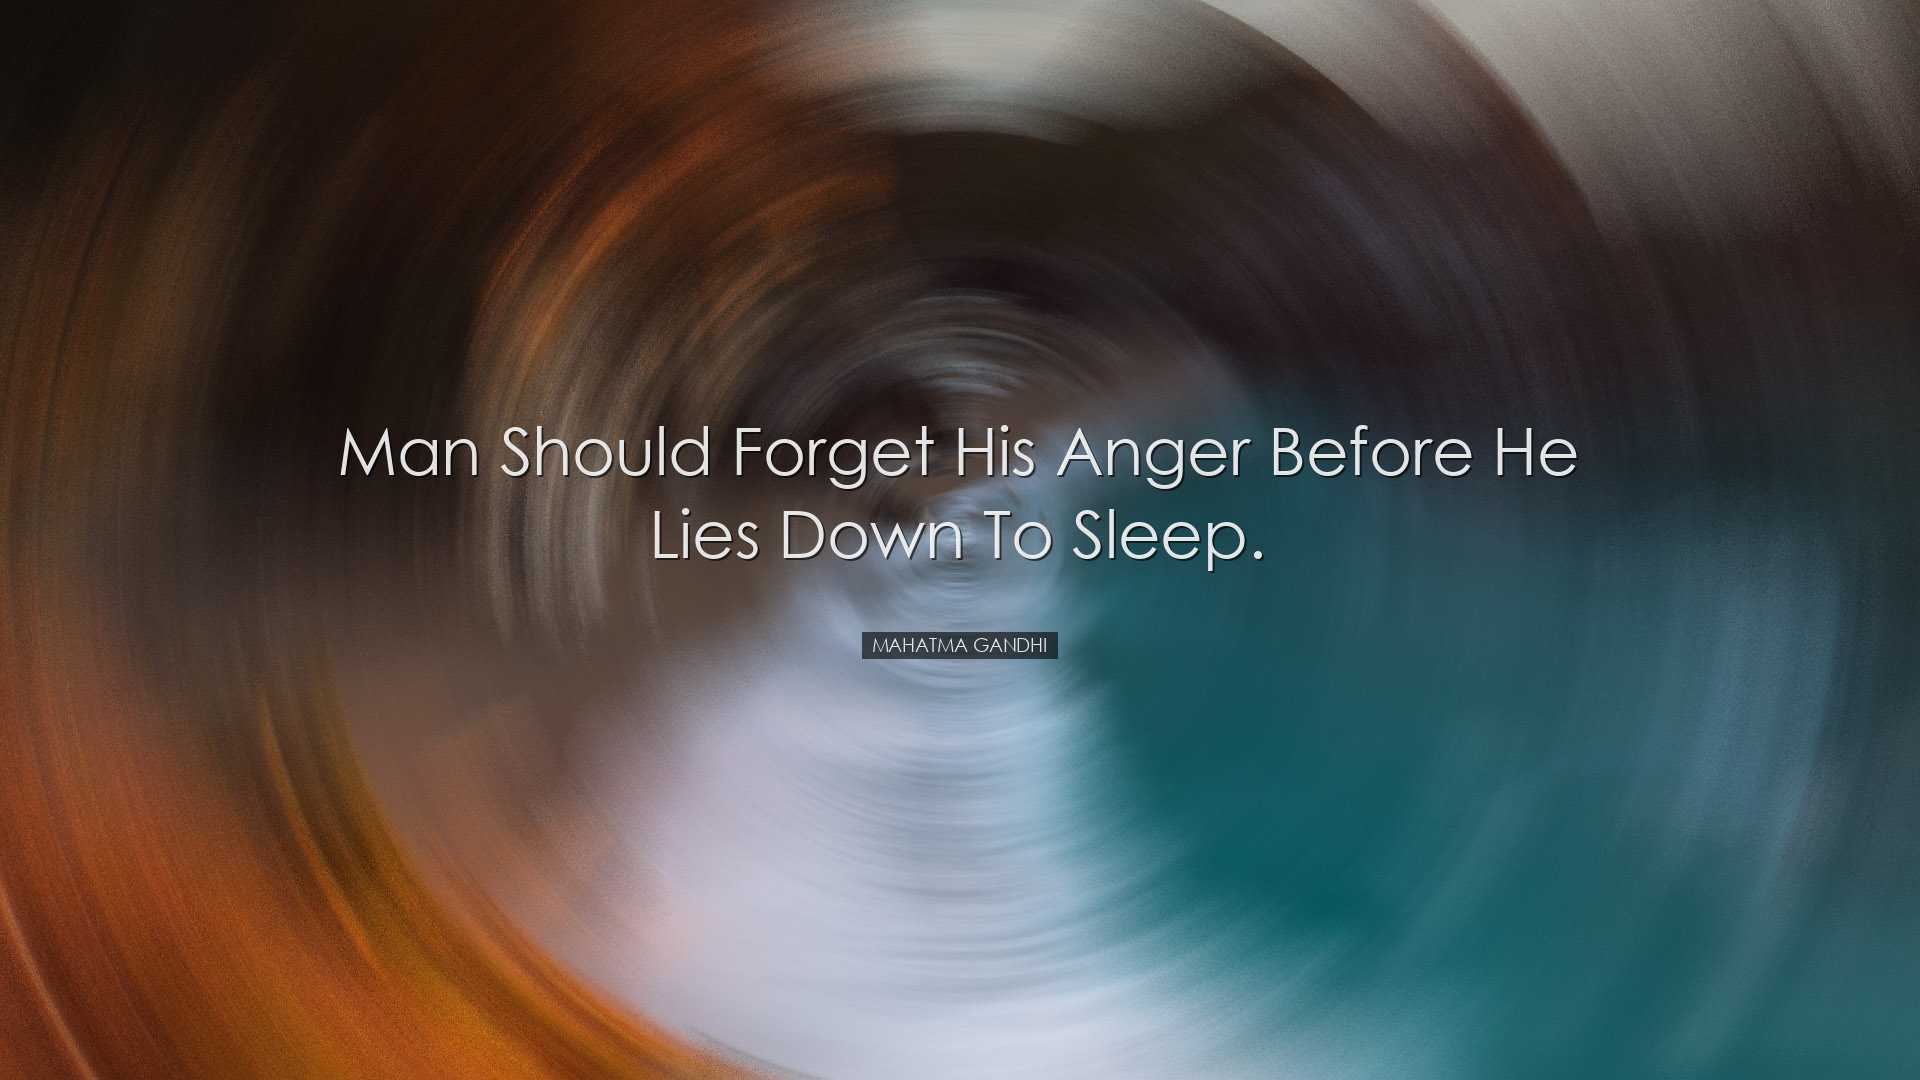 Man should forget his anger before he lies down to sleep. - Mahatm